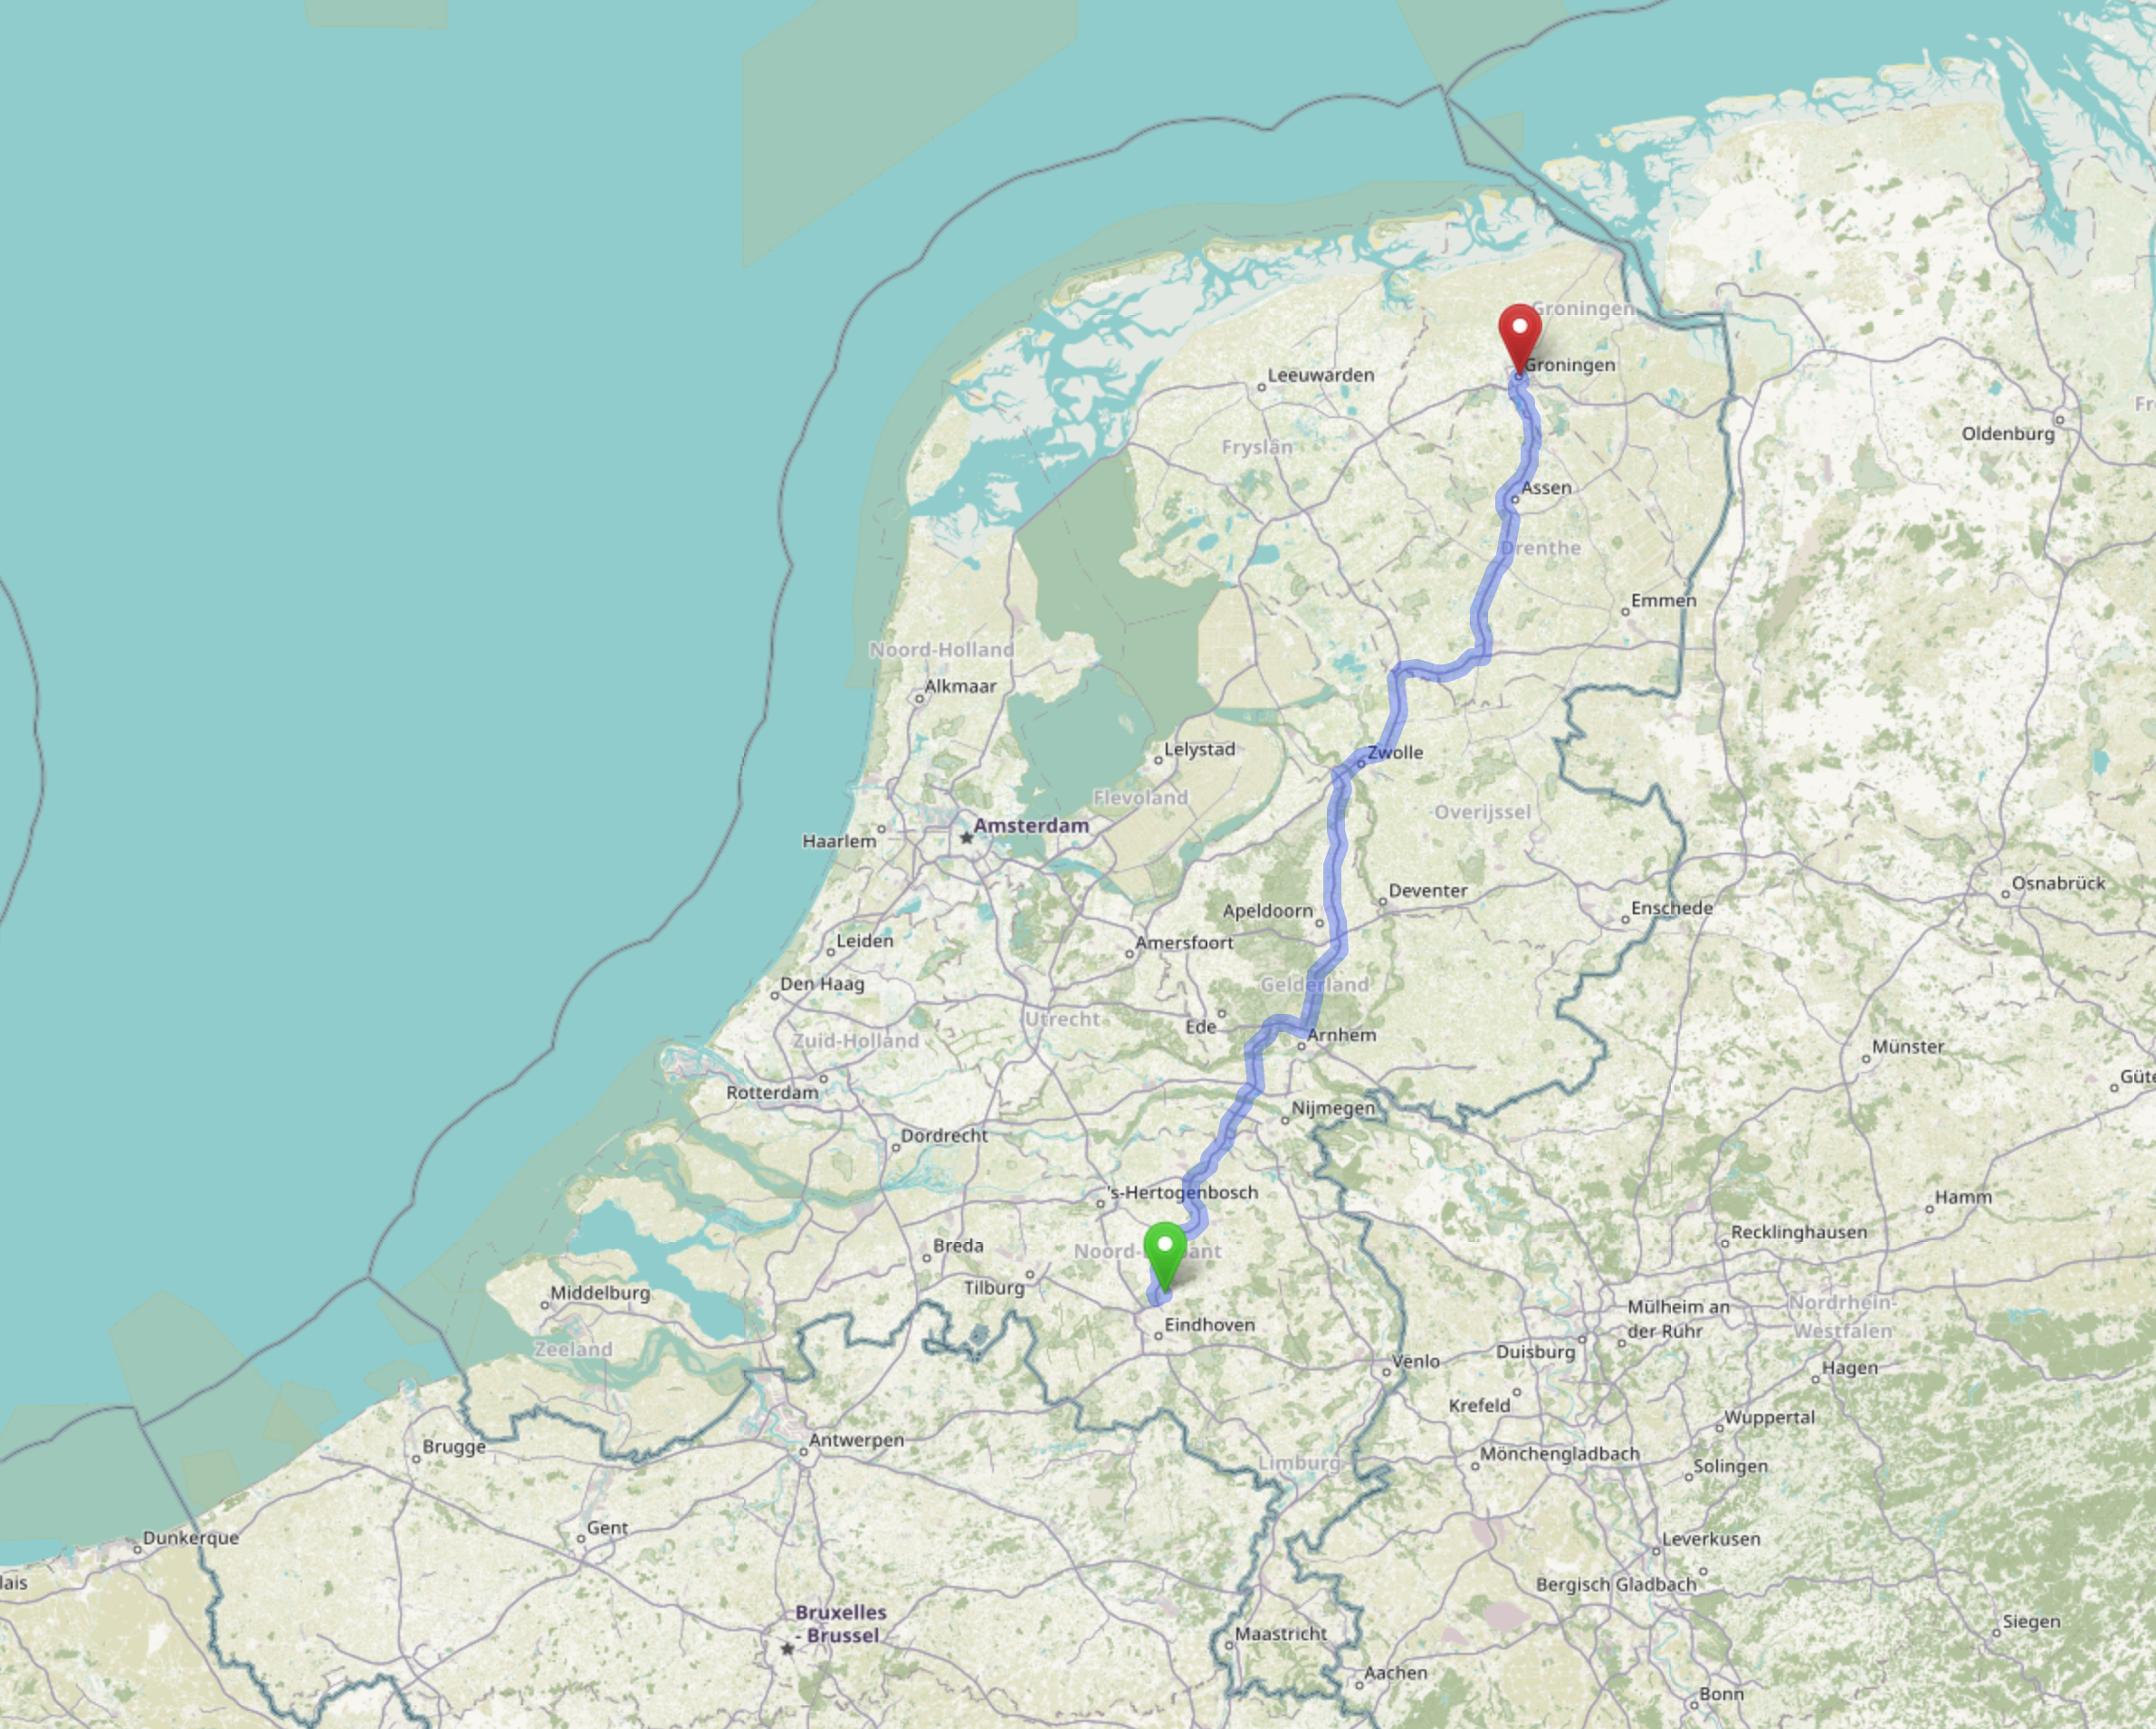 Route Son en Breugel to Groningen, 3 hours and 10 minutes without traffic